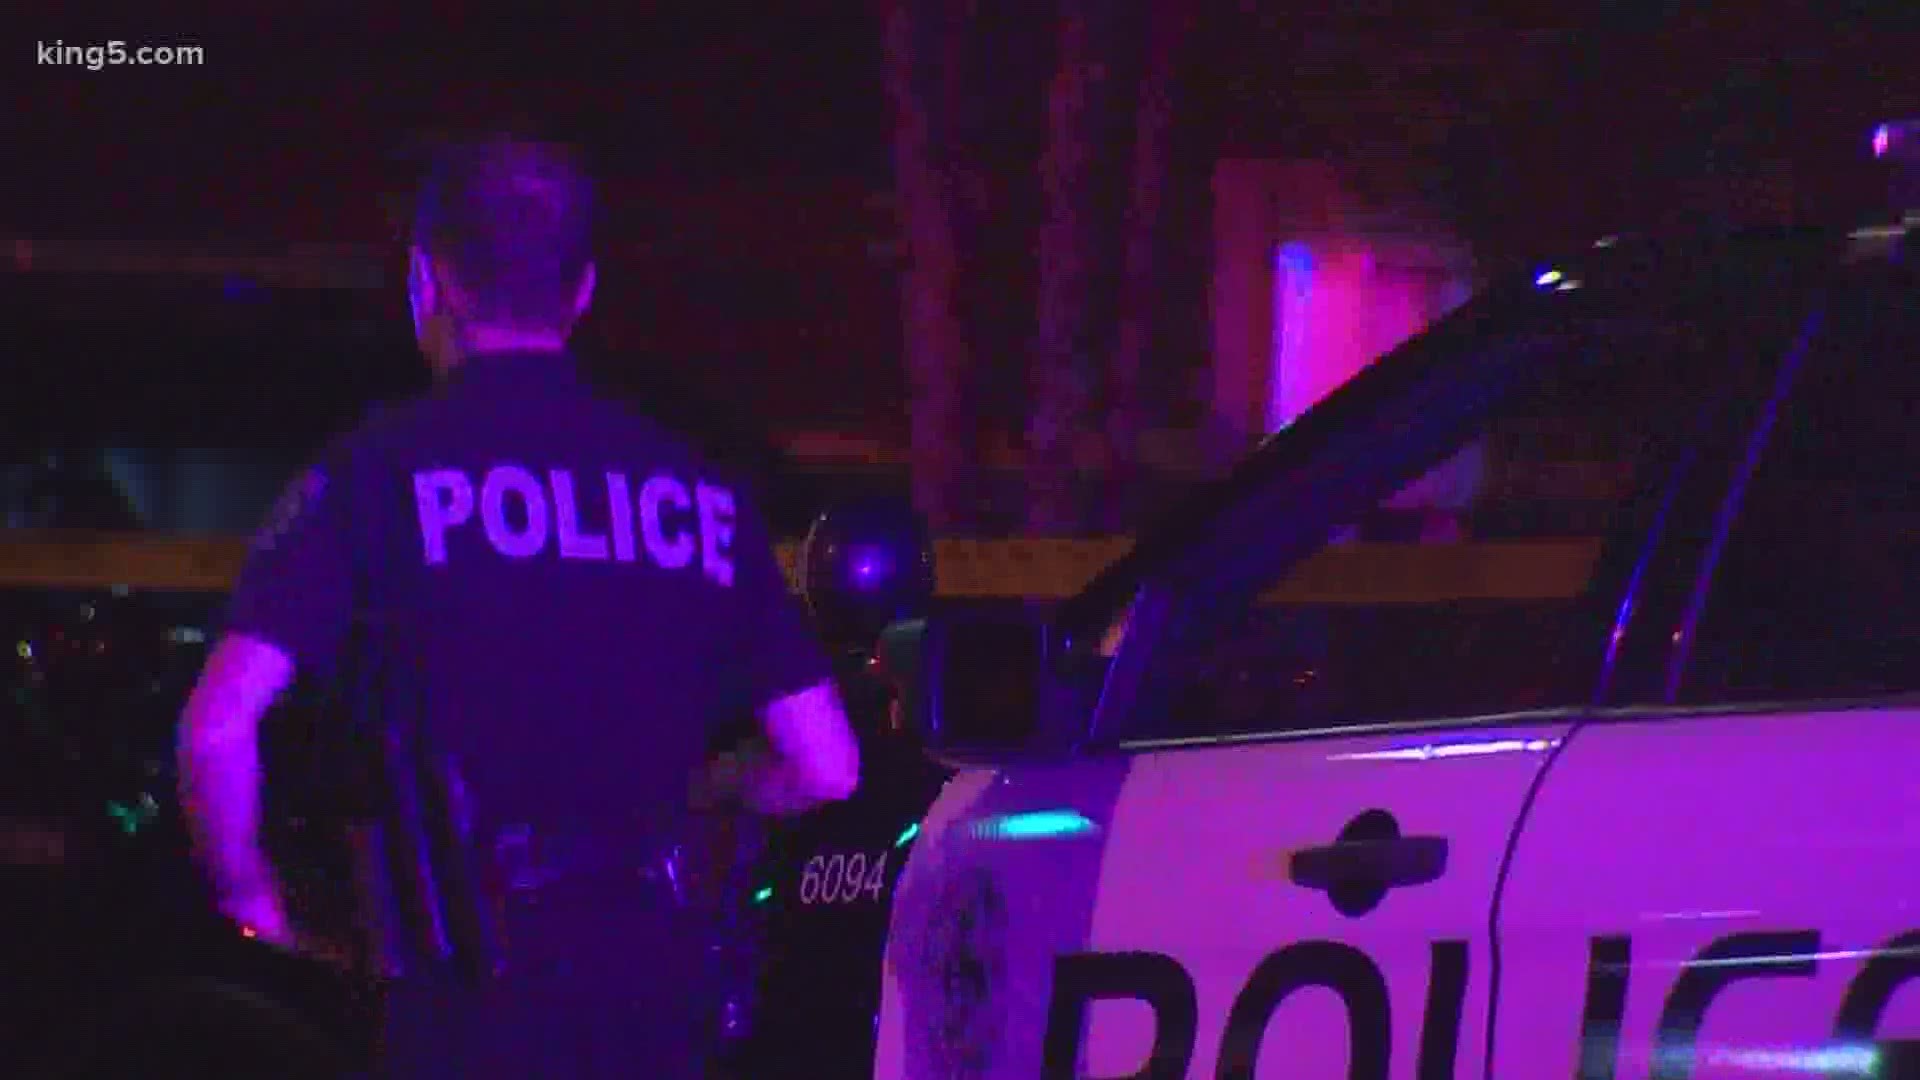 Federal Way police are looking for the person who shot and killed a man just outside the Westway Community Center in Federal Way Monday night.